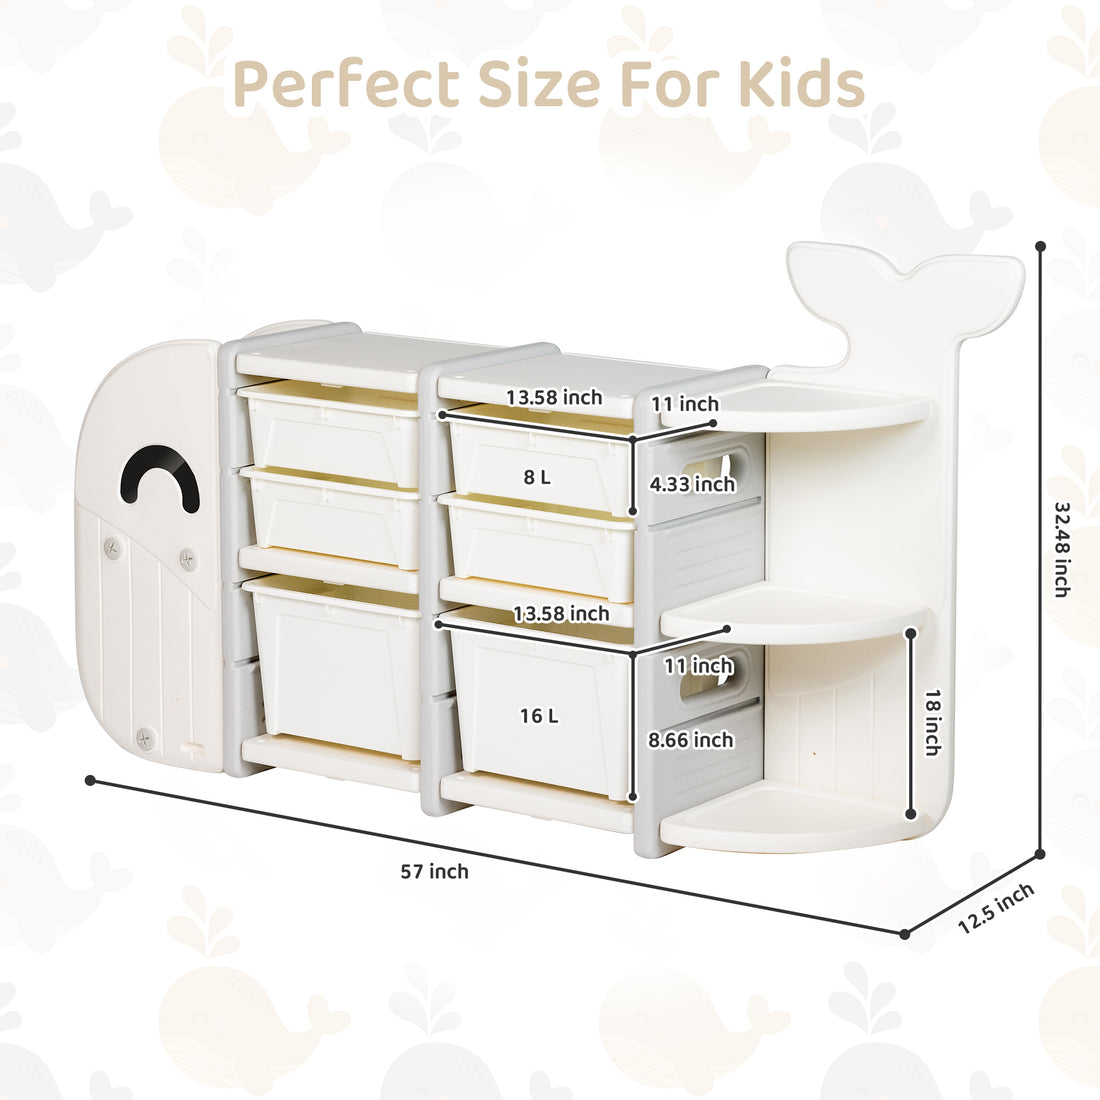 DUKE BABY Kids Small 3 Layer Toy Storage Organizer with 6 Storage Bins and Display Bookshelves for Kids Playroom Bedrooms Age 1-12, Whale Collection White